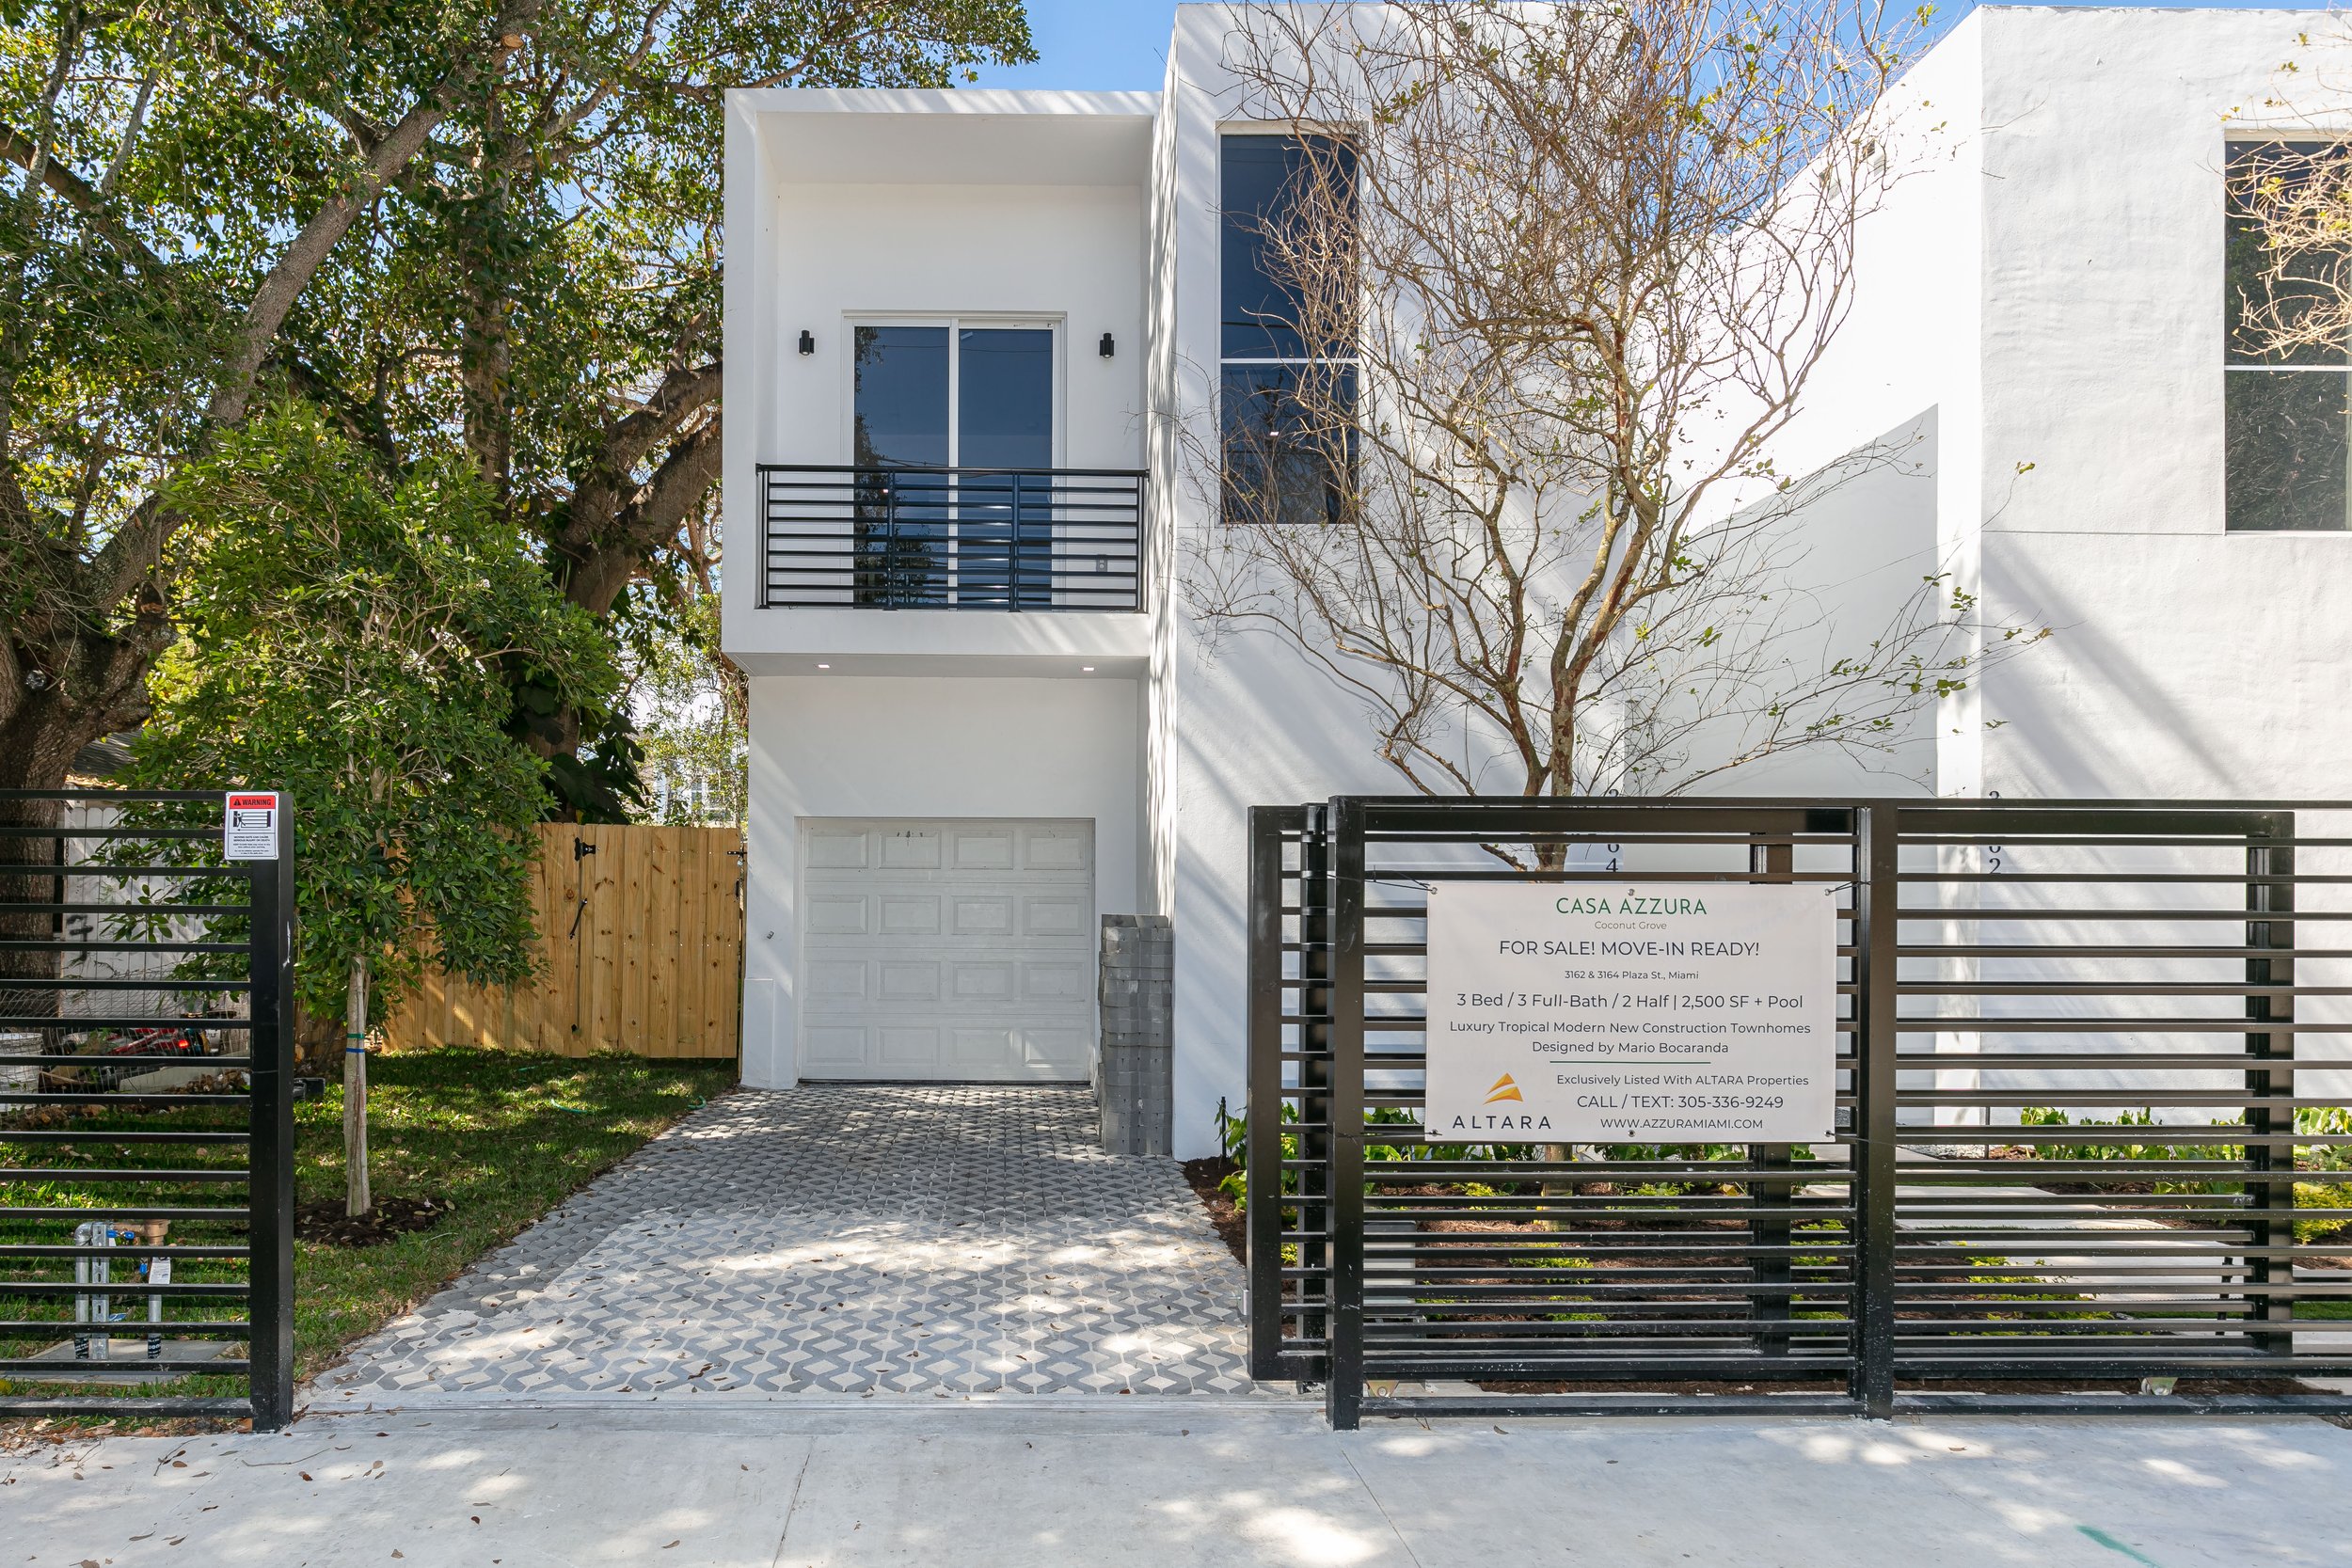 ALTARA Properties Launches Sales Of Newly Completed Casa Azzura Luxury Townhomes In Coconut Grove 51.jpg